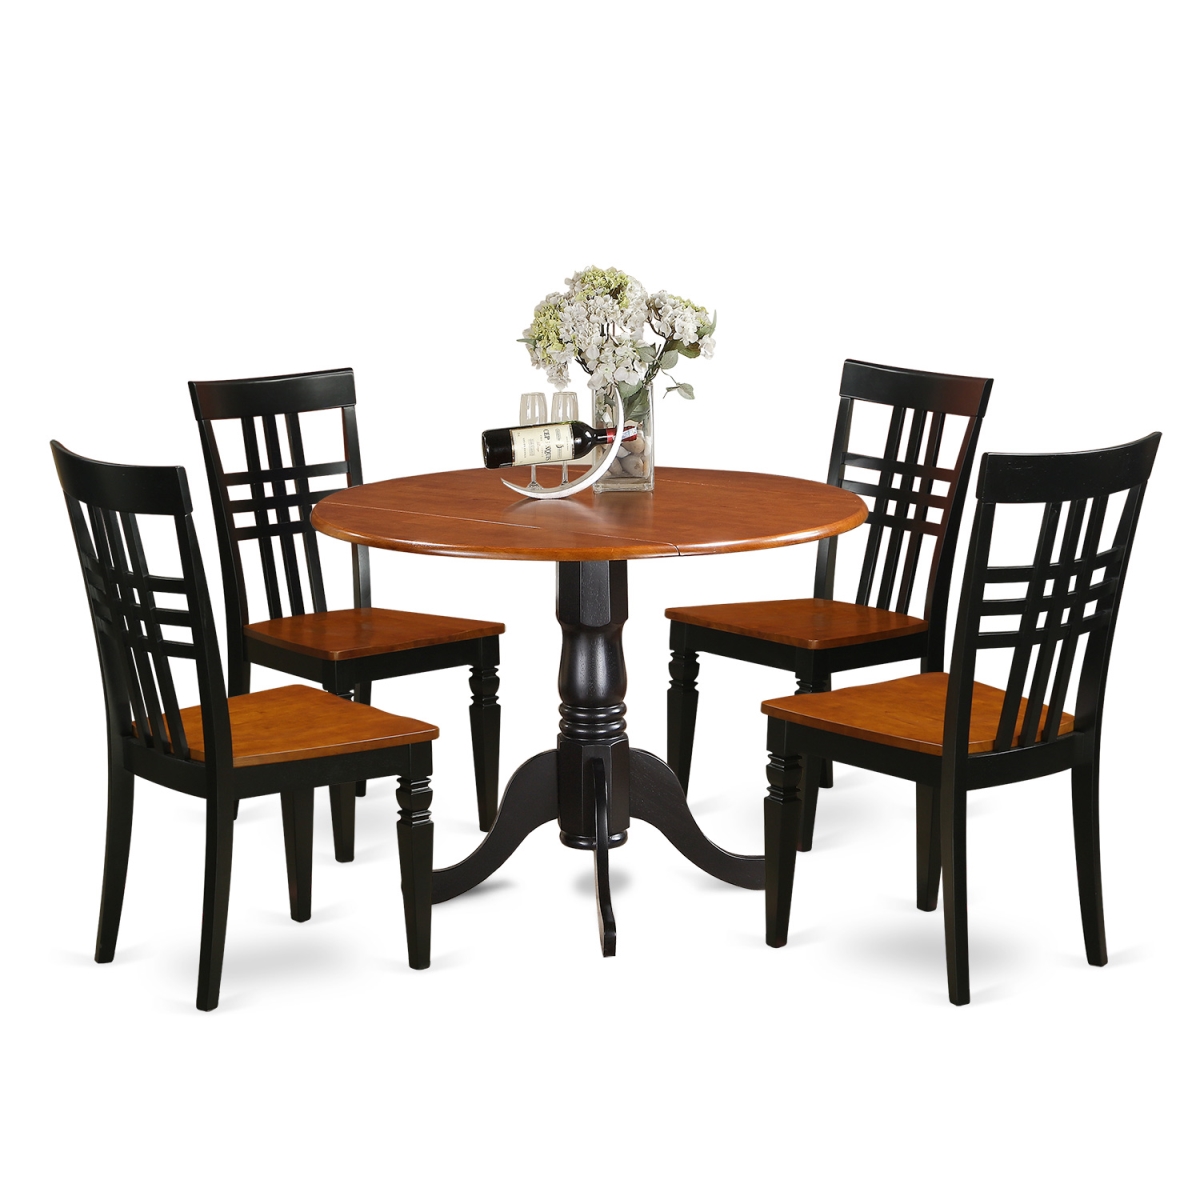 Picture of East West Furniture DLLG5-BCH-W Table Set with One Dublin Table & Four Chairs, Black & Cherry - 5 Piece